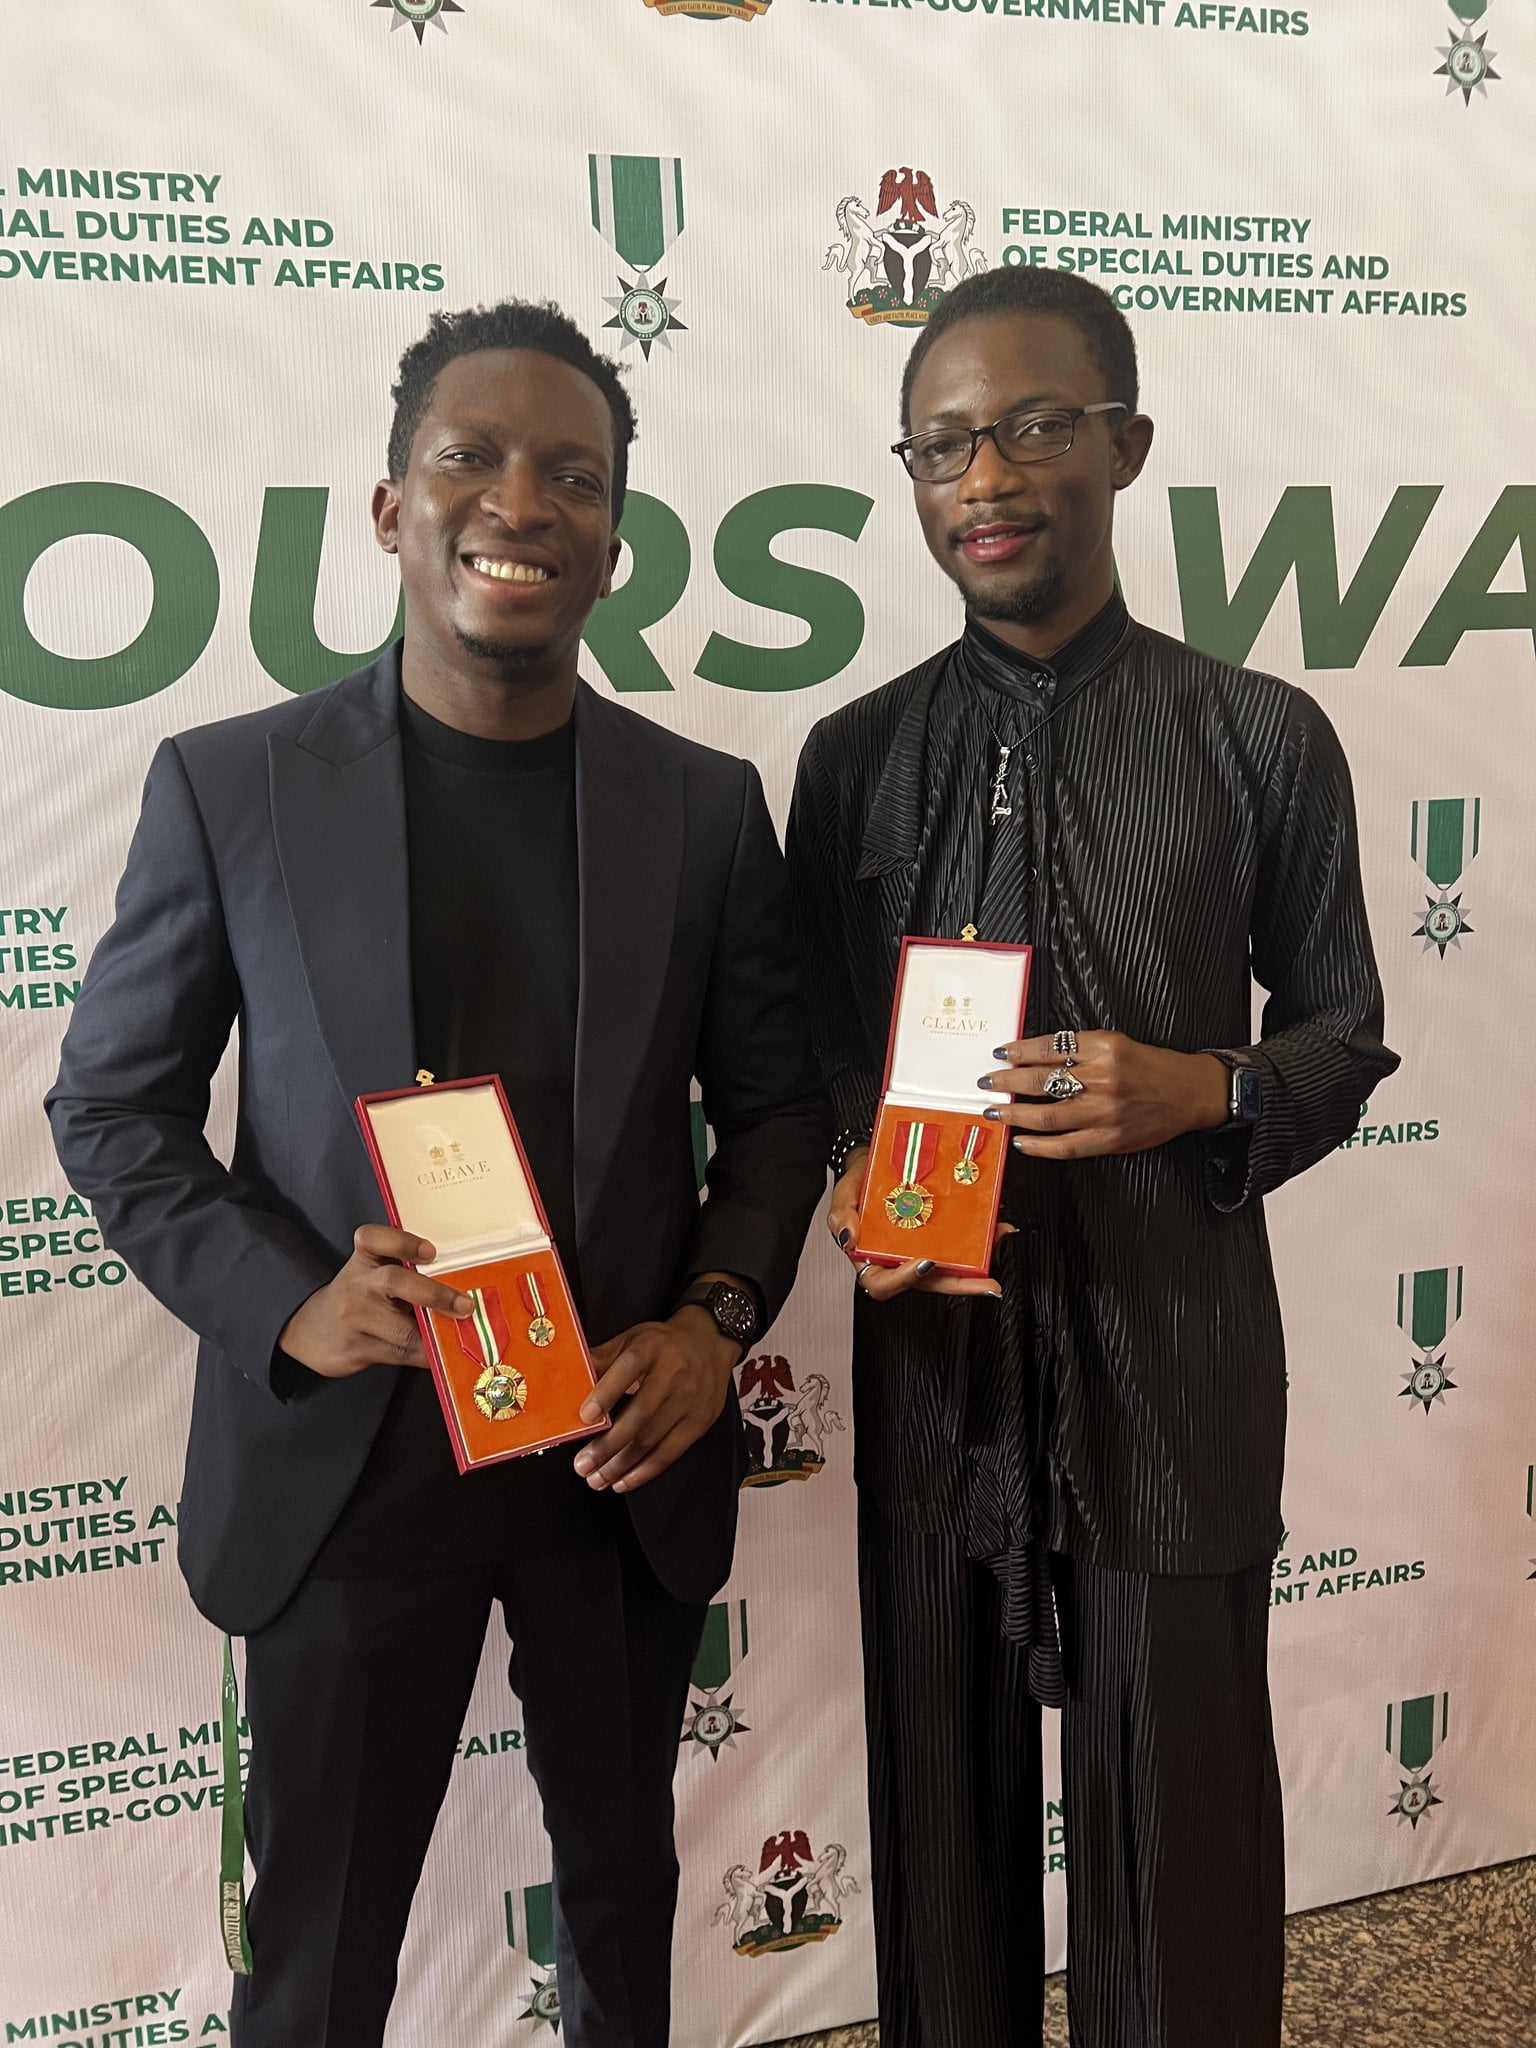 Buhari in shock as Paystack co-founder Ezra Olubi collects award dressed in female accessories [video]